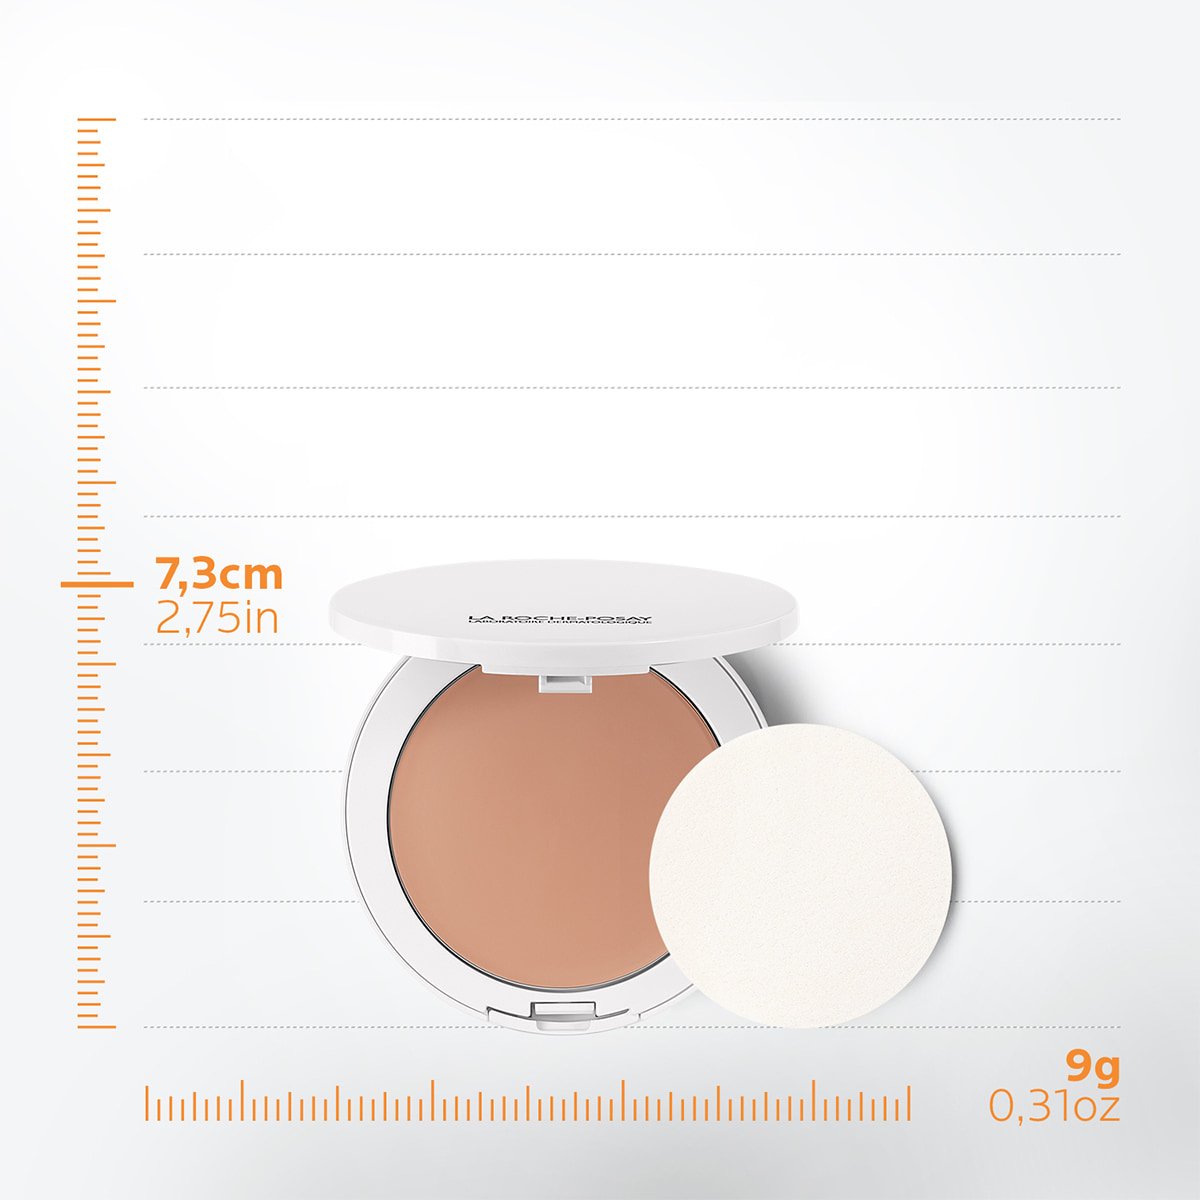 La Roche Posay ProductPage Sun Anthelios XL Compact Cream Unifying Spf